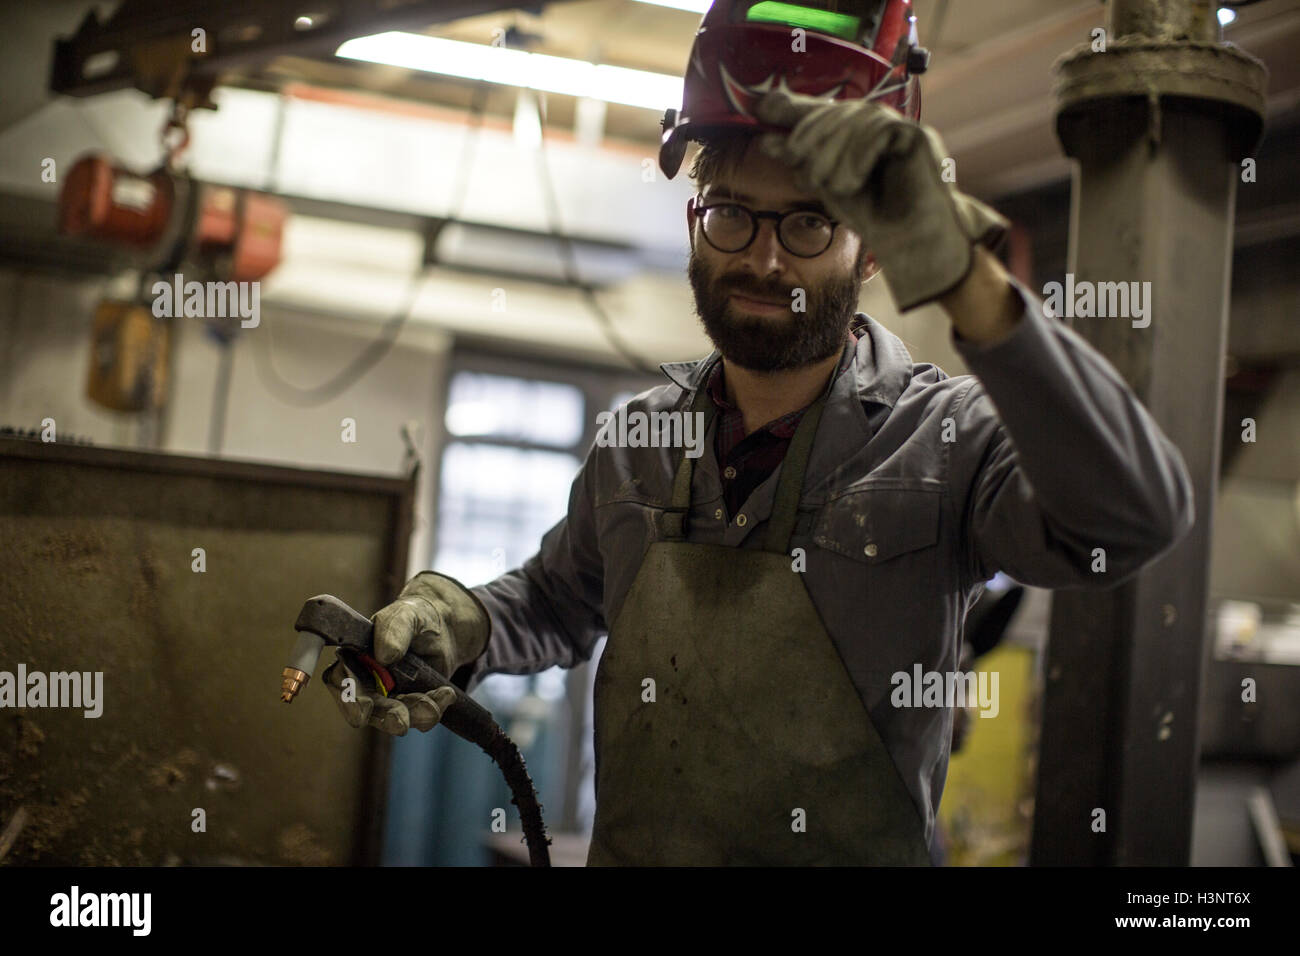 Welder holding welding torch looking at camera Stock Photo